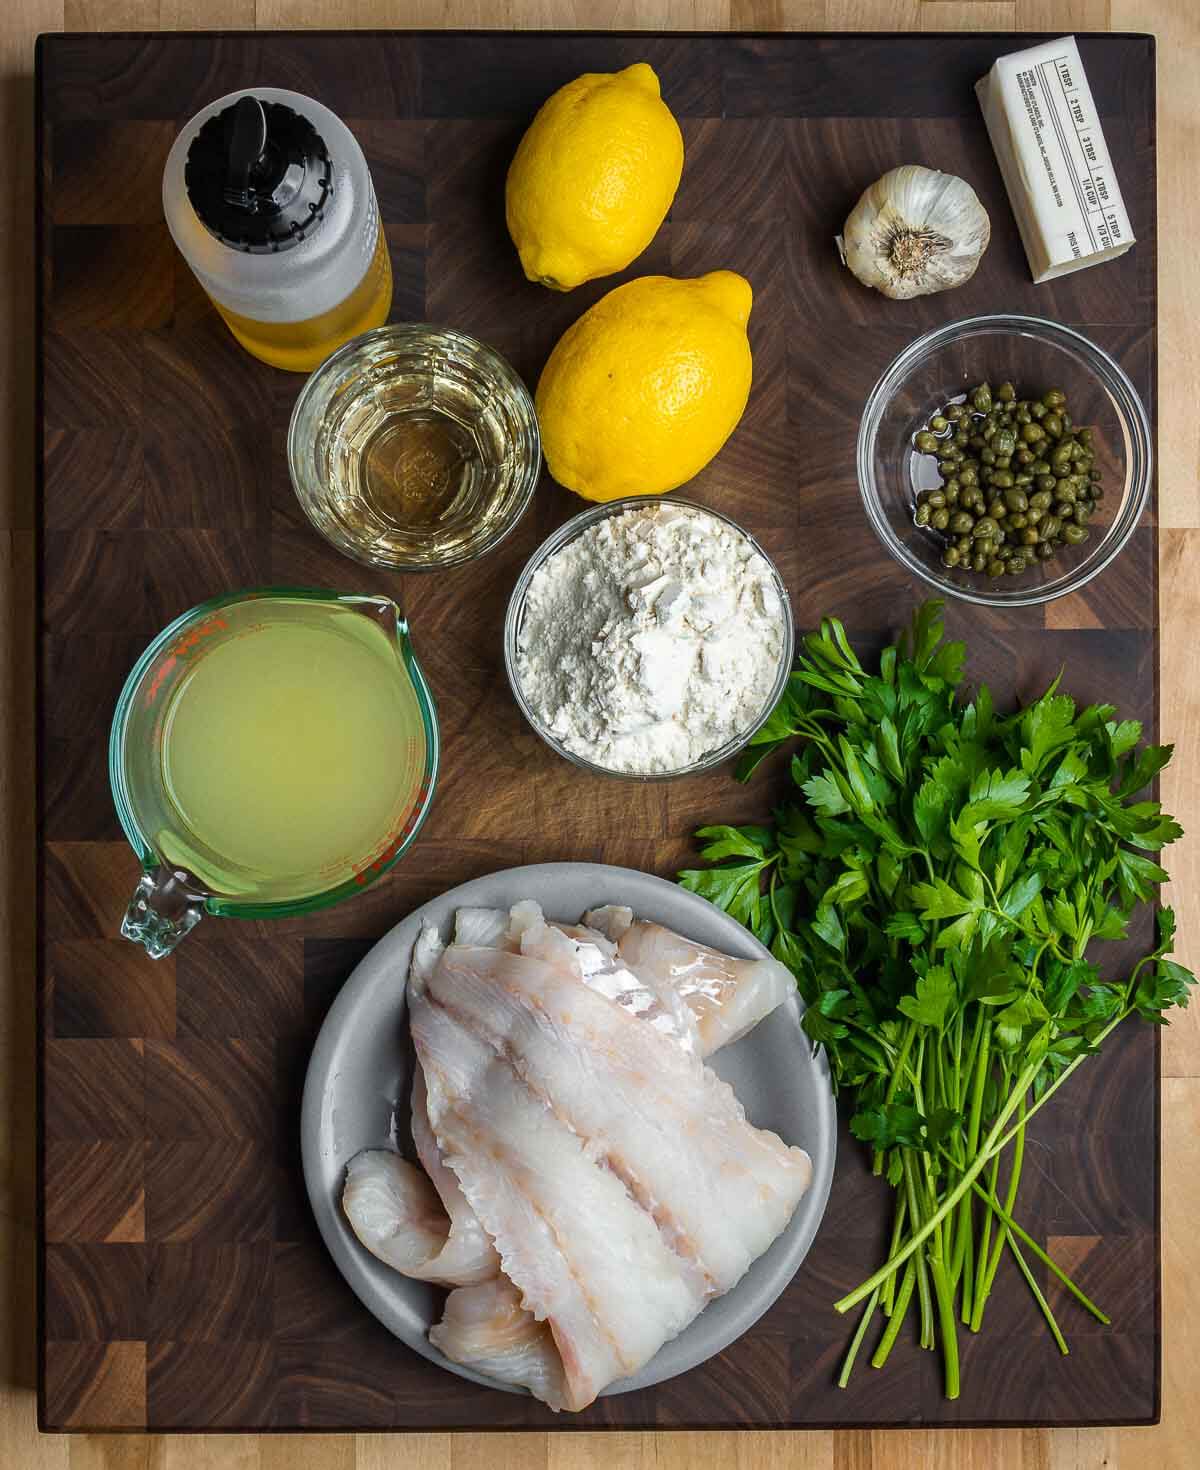 Ingredients shown: olive oil, white wine, lemons, garlic, butter, capers, chicken stock, flour, cod, and parsley.